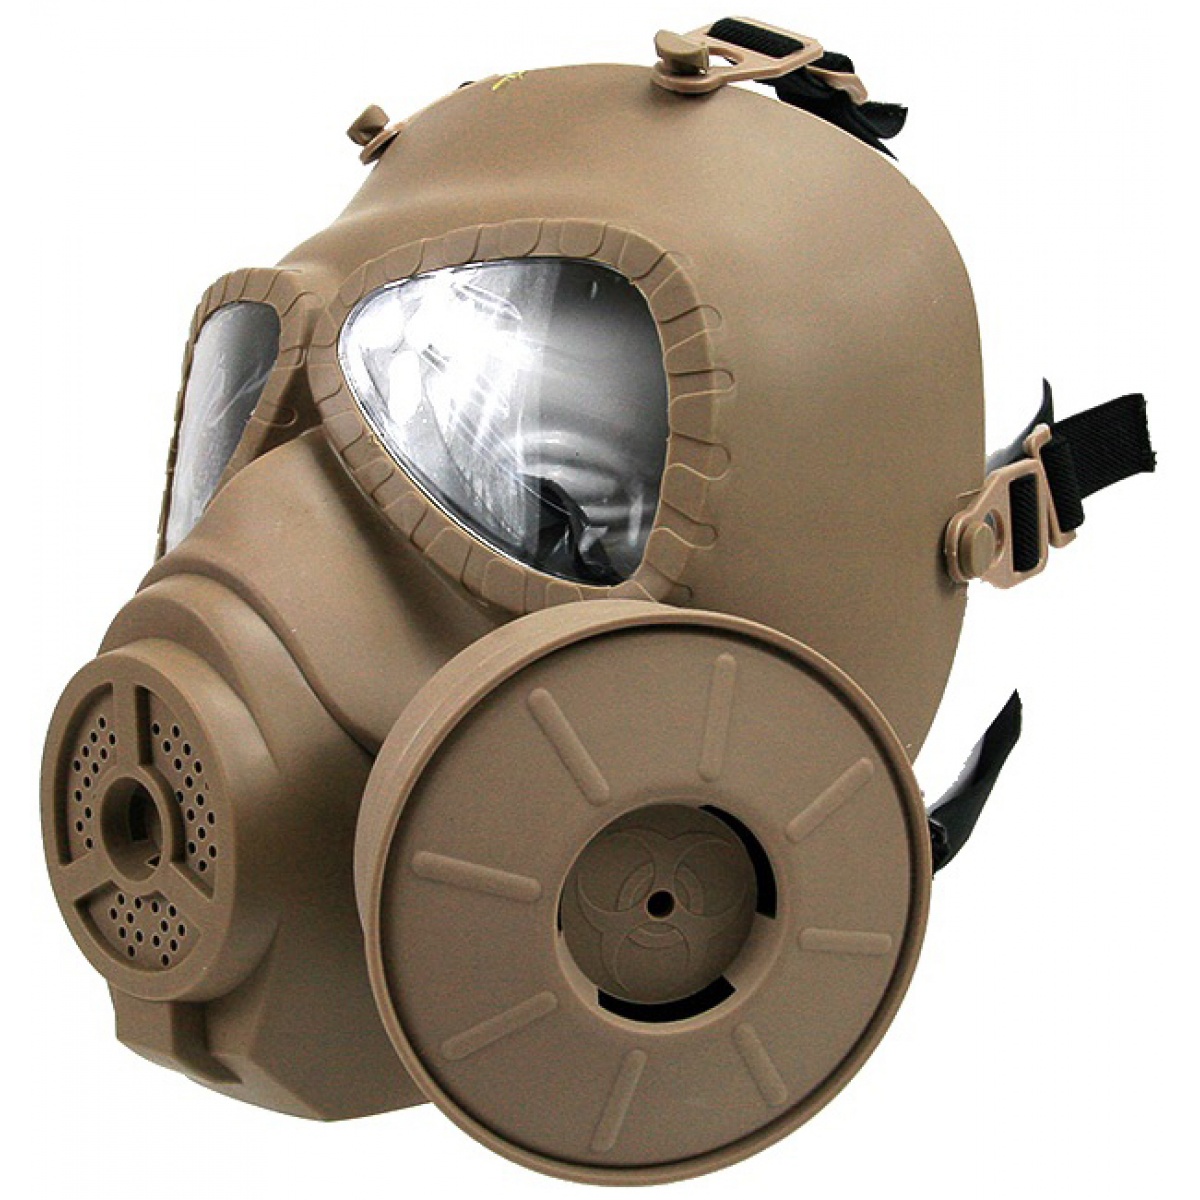 Tandd Airsoft Toxic Full Face Gas Mask With Anti Fog Fan Color Tan